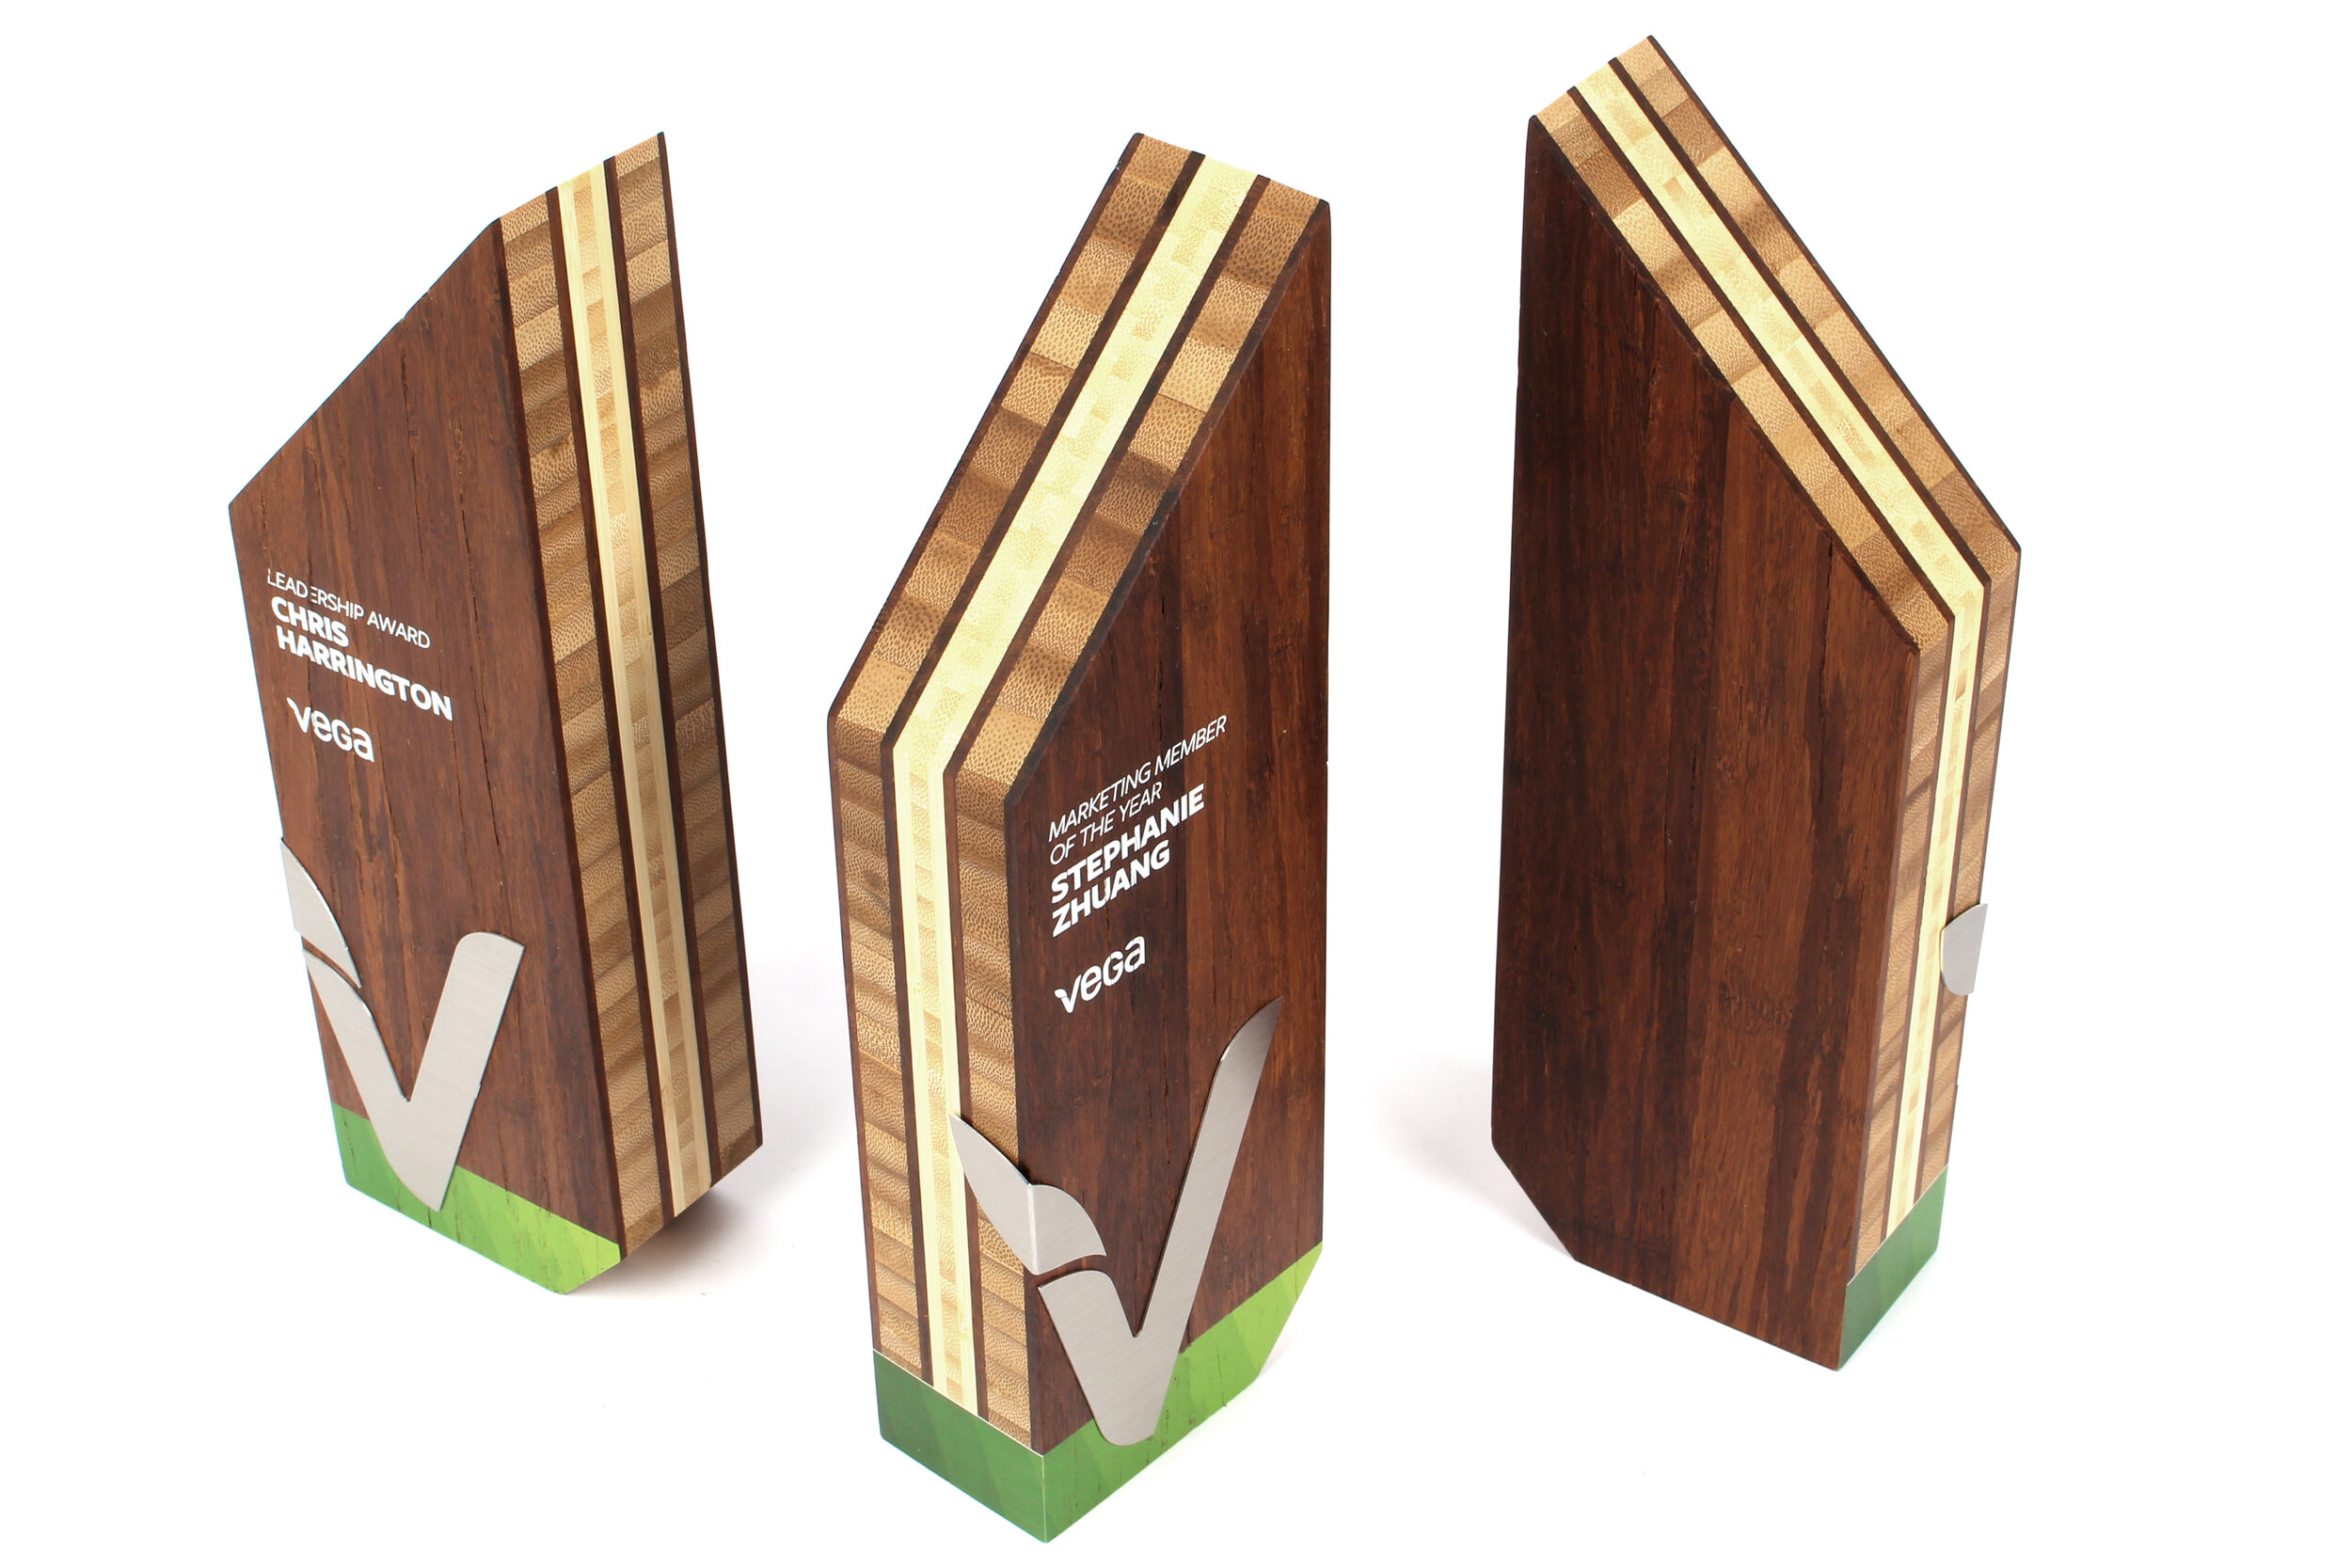 VEGA custom marketing and leadership awards for a corporate event conference bamboo sustainable awards 1